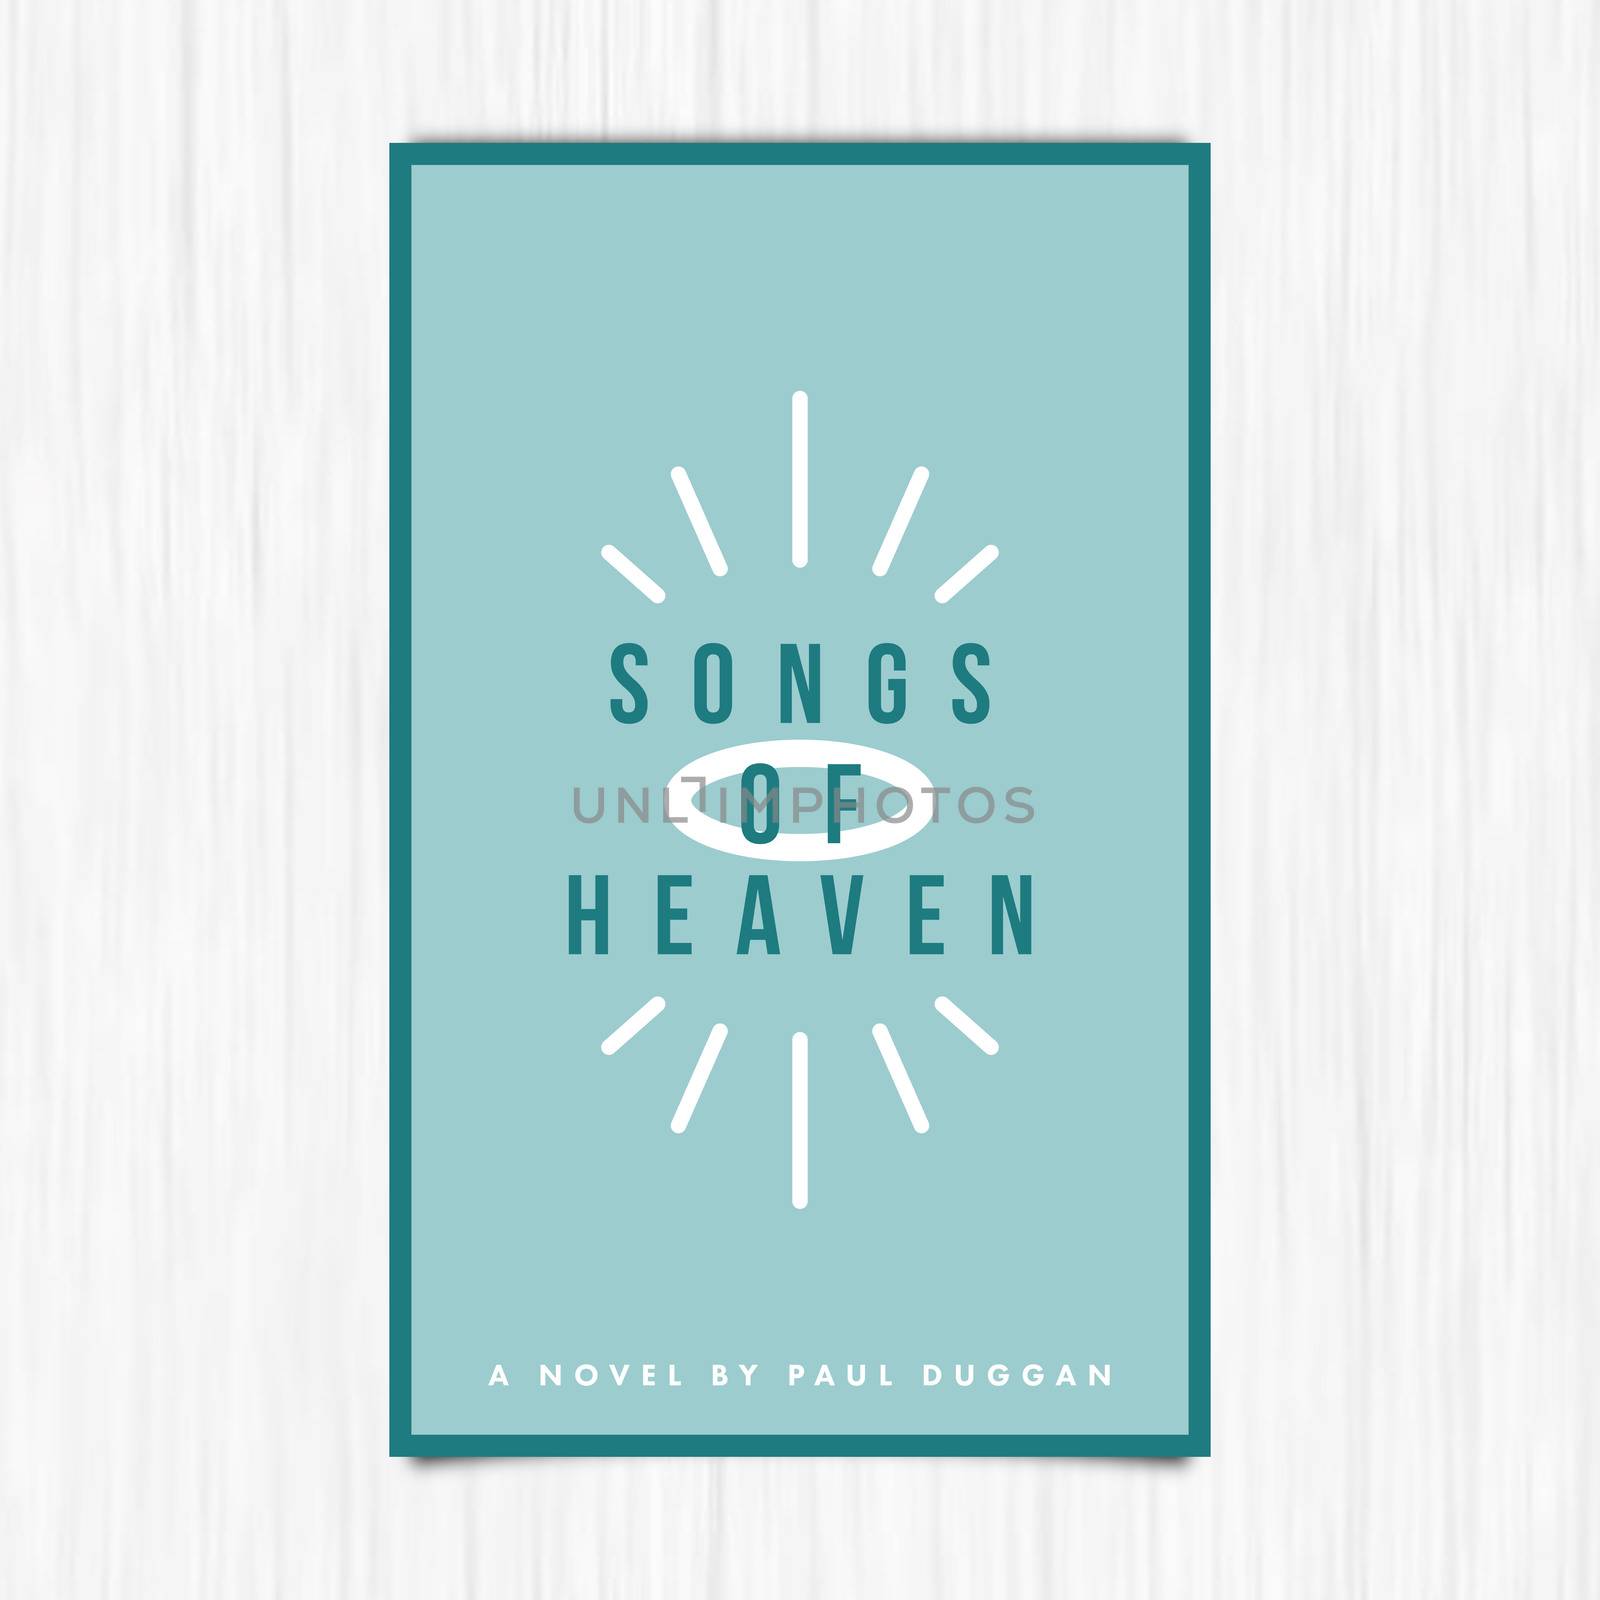 Vector of novel cover with songs of heaven text by Wavebreakmedia